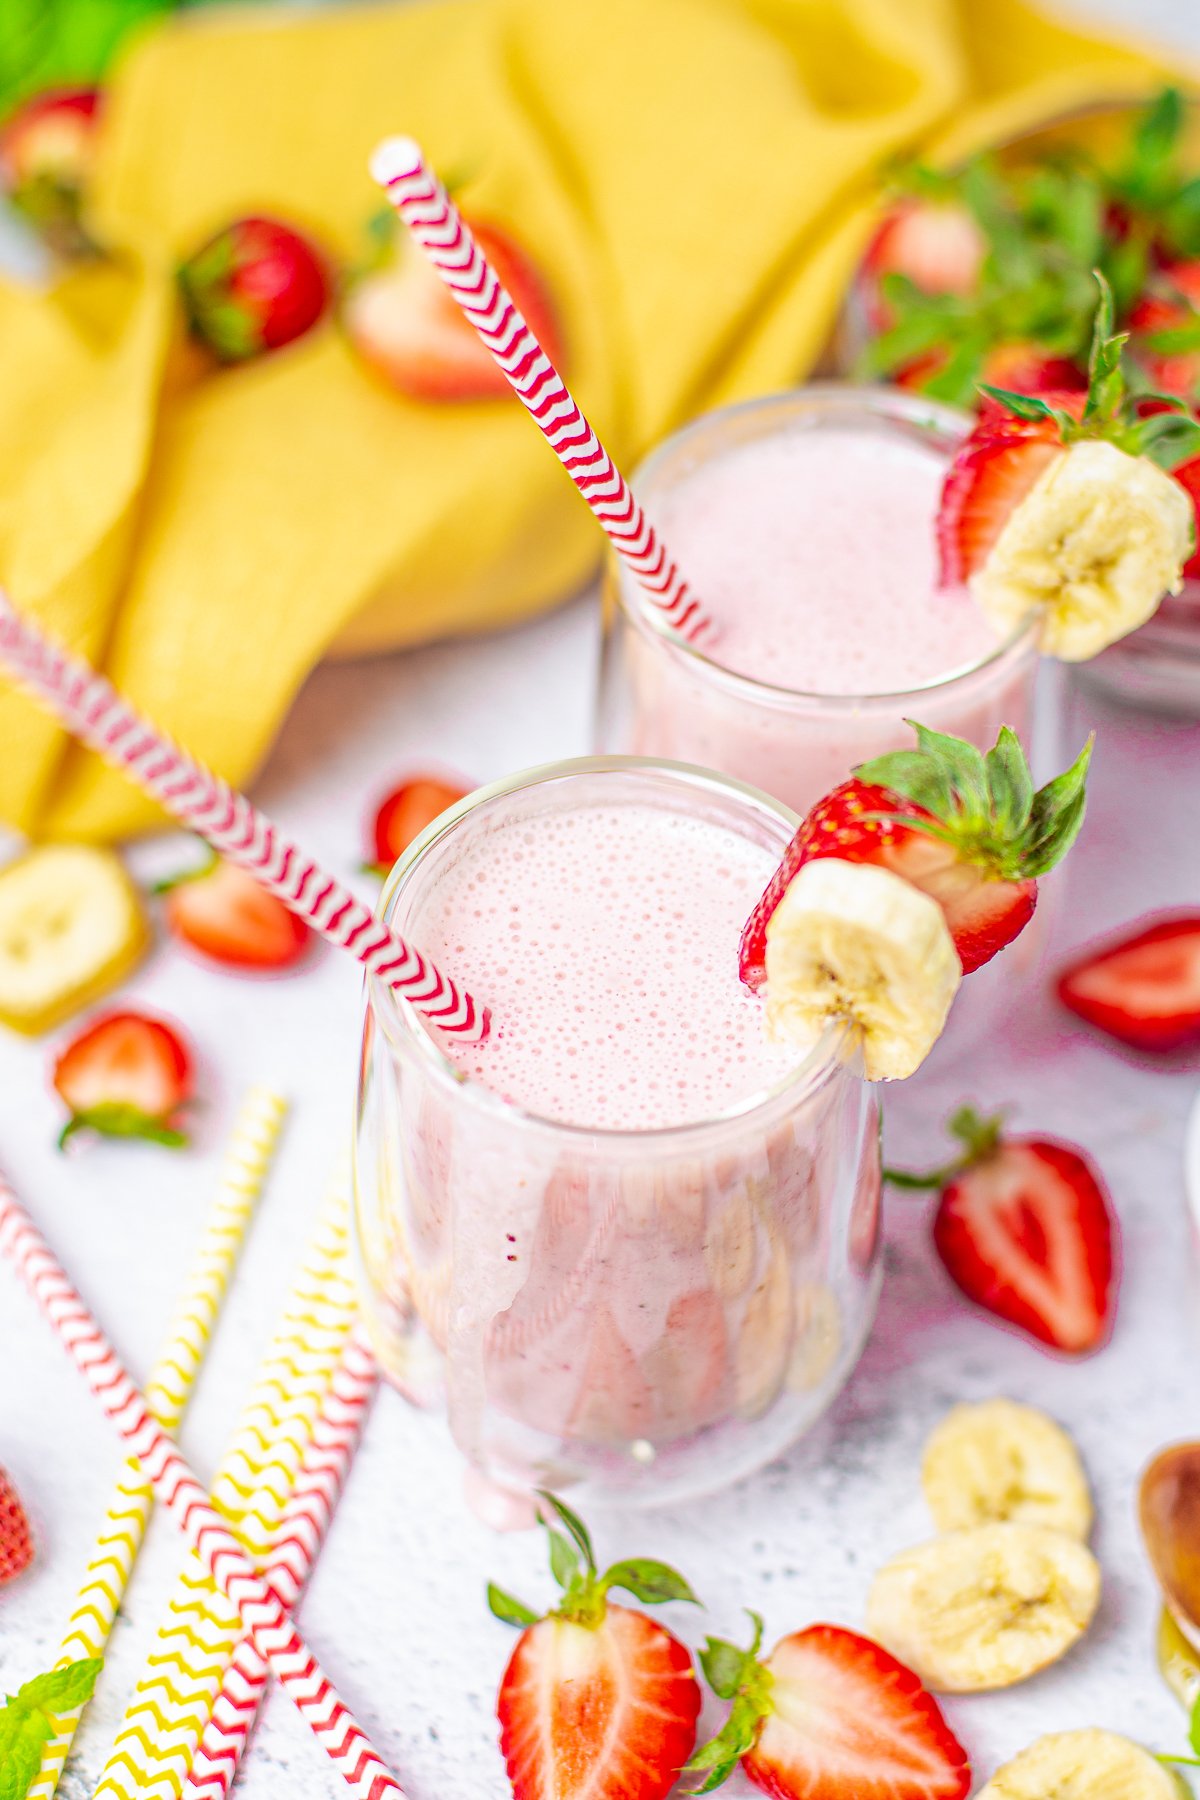 Sightly overhead photo of two smoothies garnish with bananas and strawberry slices